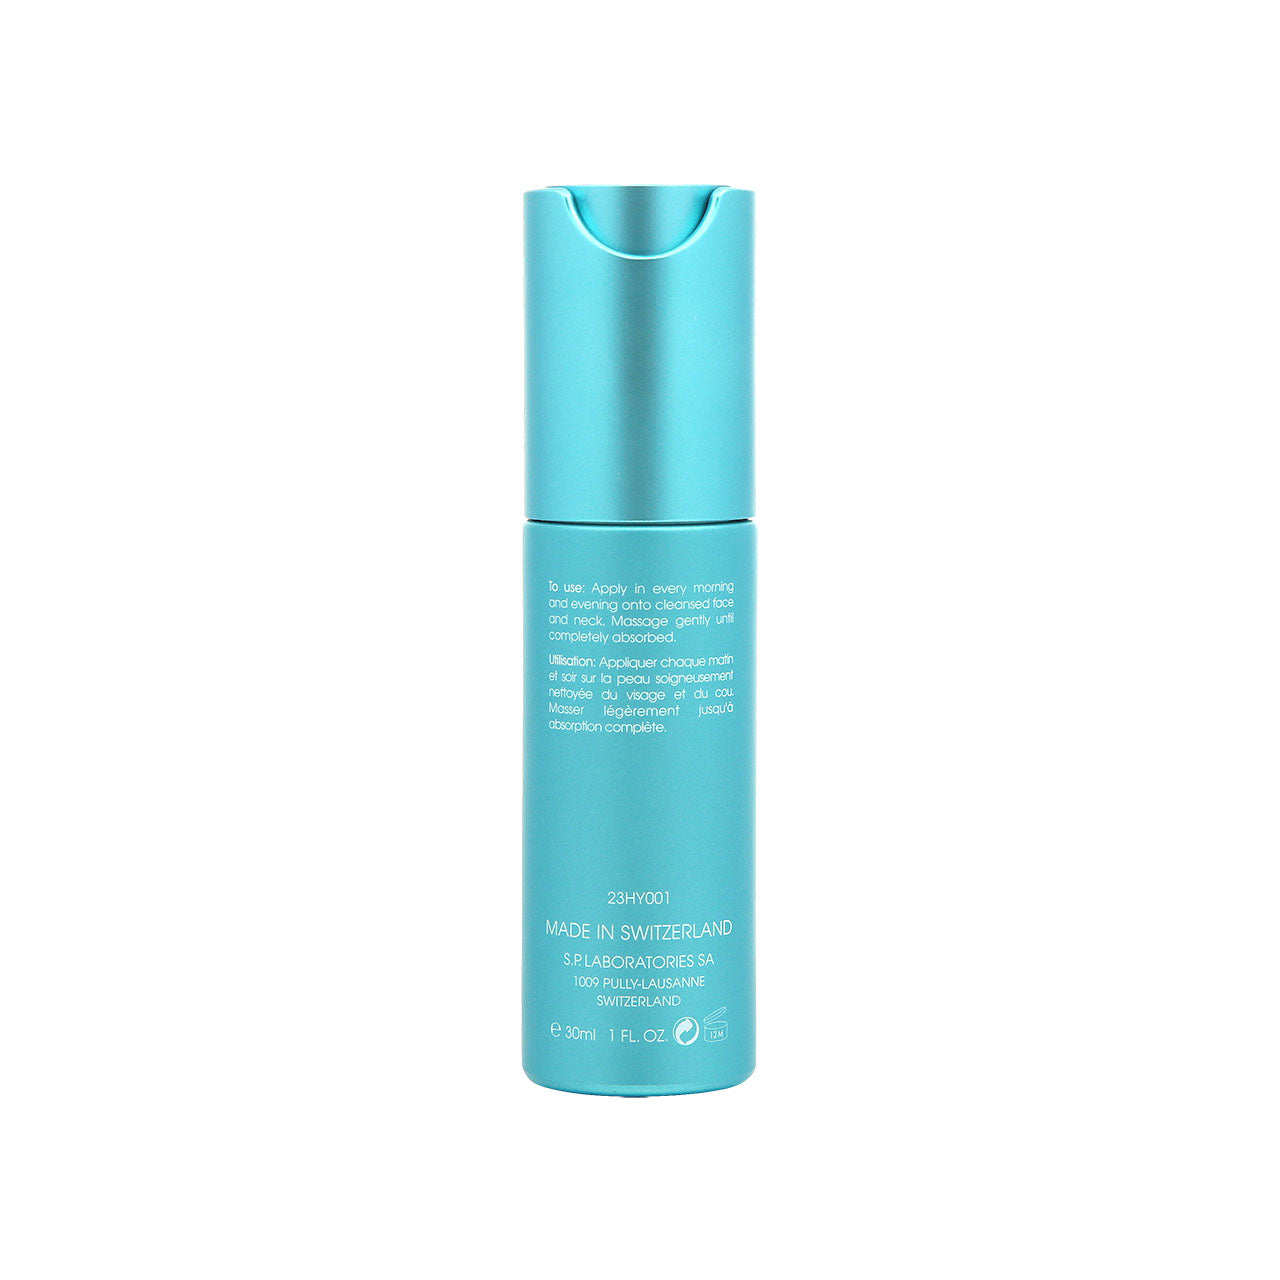 Suisse Programme Hydro Recovery Serum 30ml